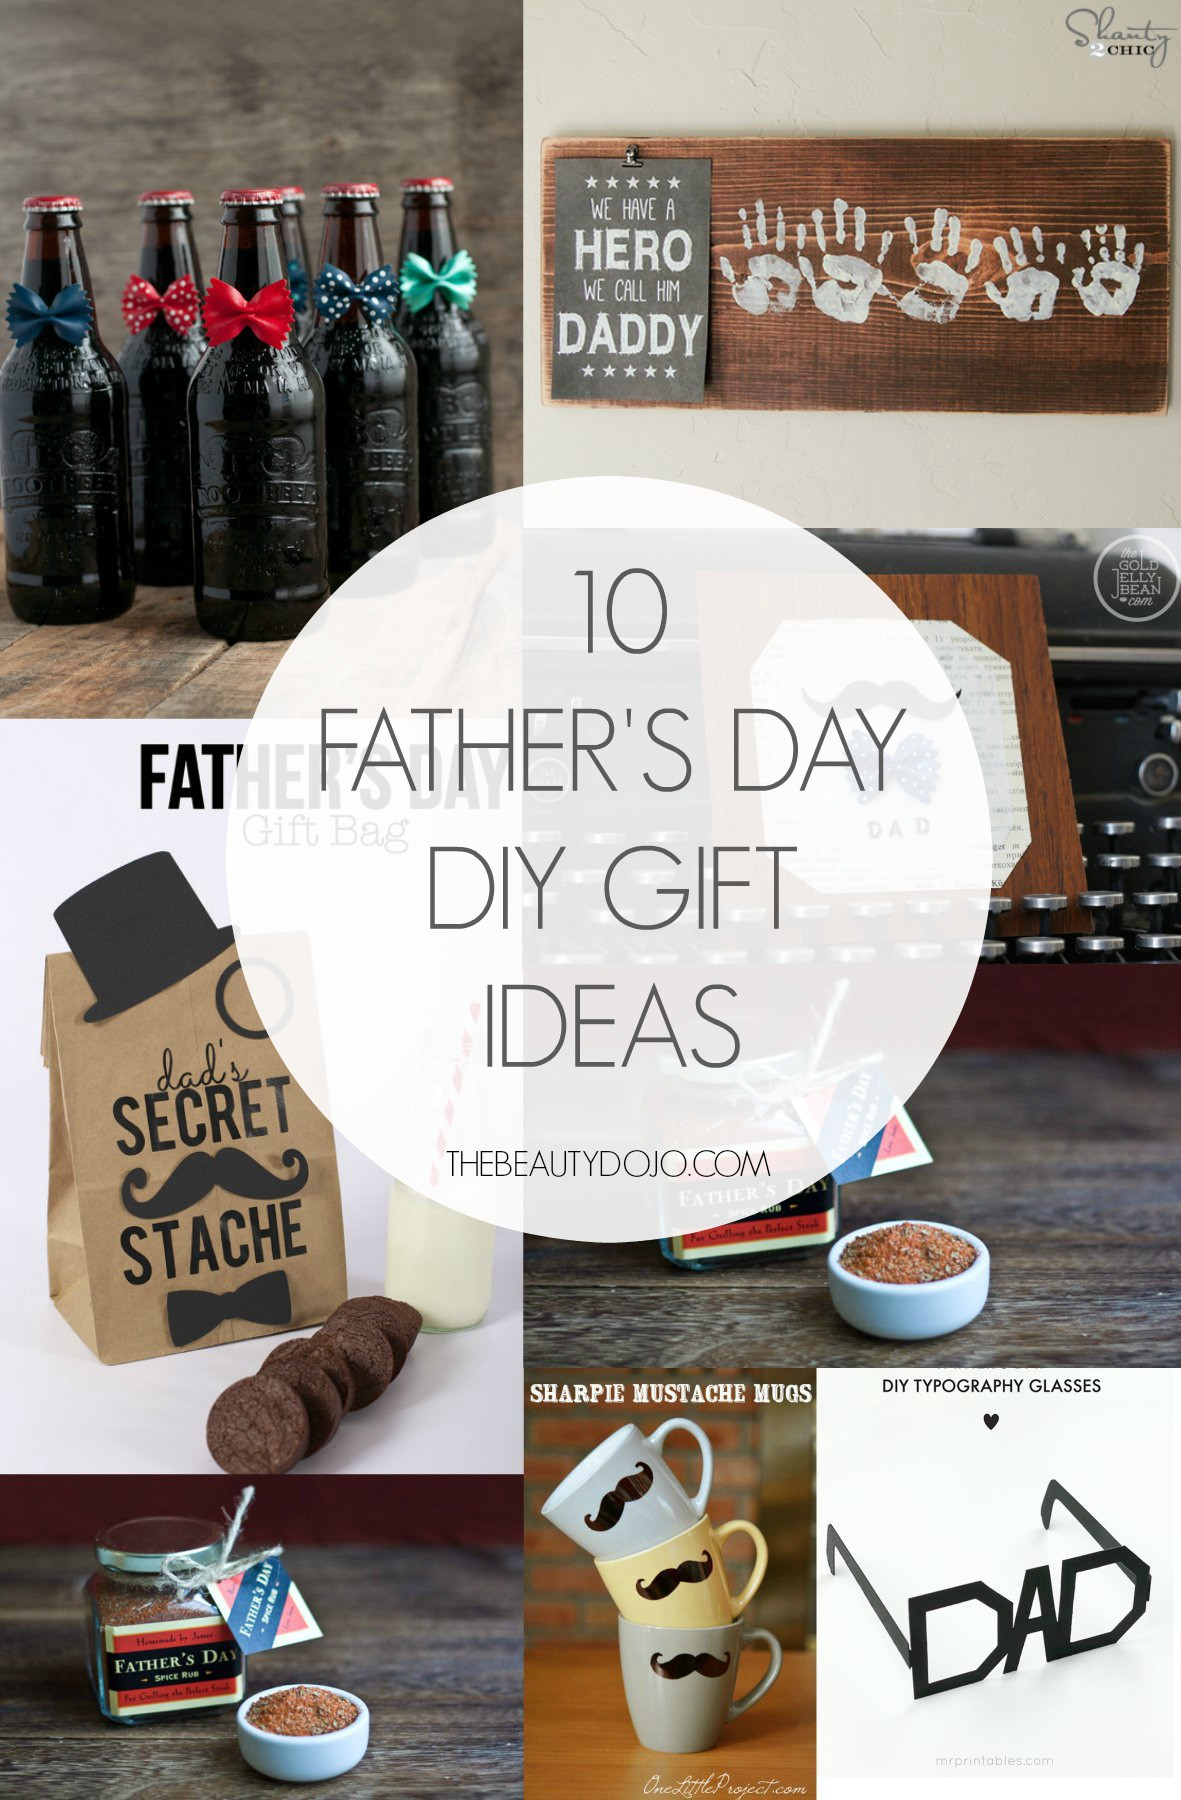 Fathers Day Diy Gift Ideas
 10 Father s Day DIY Gift Ideas The Beautydojo